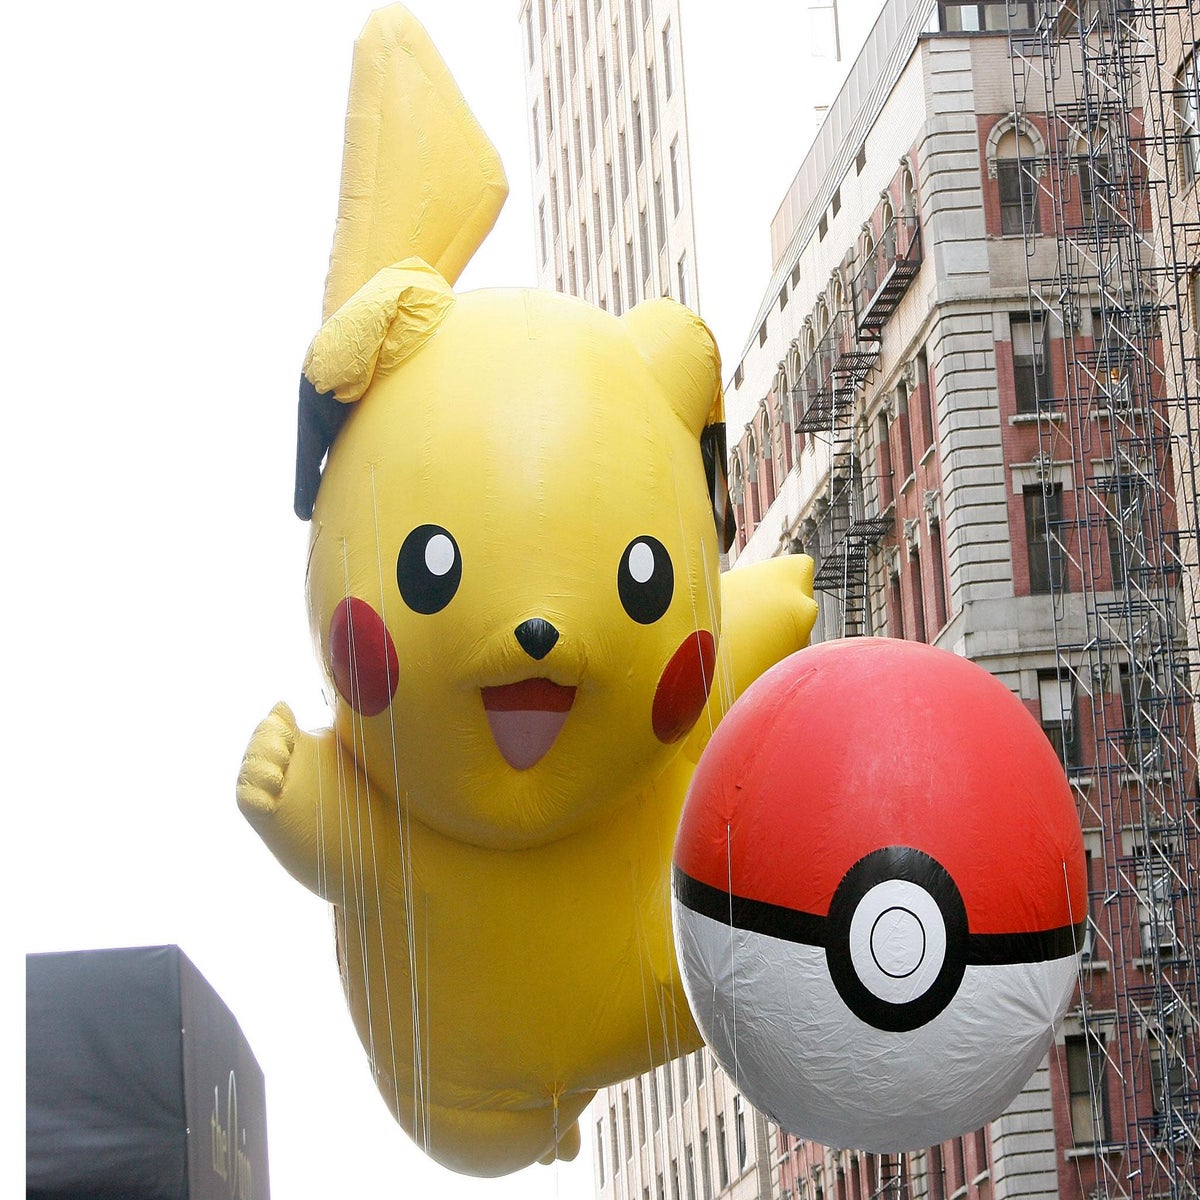 Pikachu and Eevee feature in the Macy's Thanksgiving Day Parade (Video) -  My Nintendo News